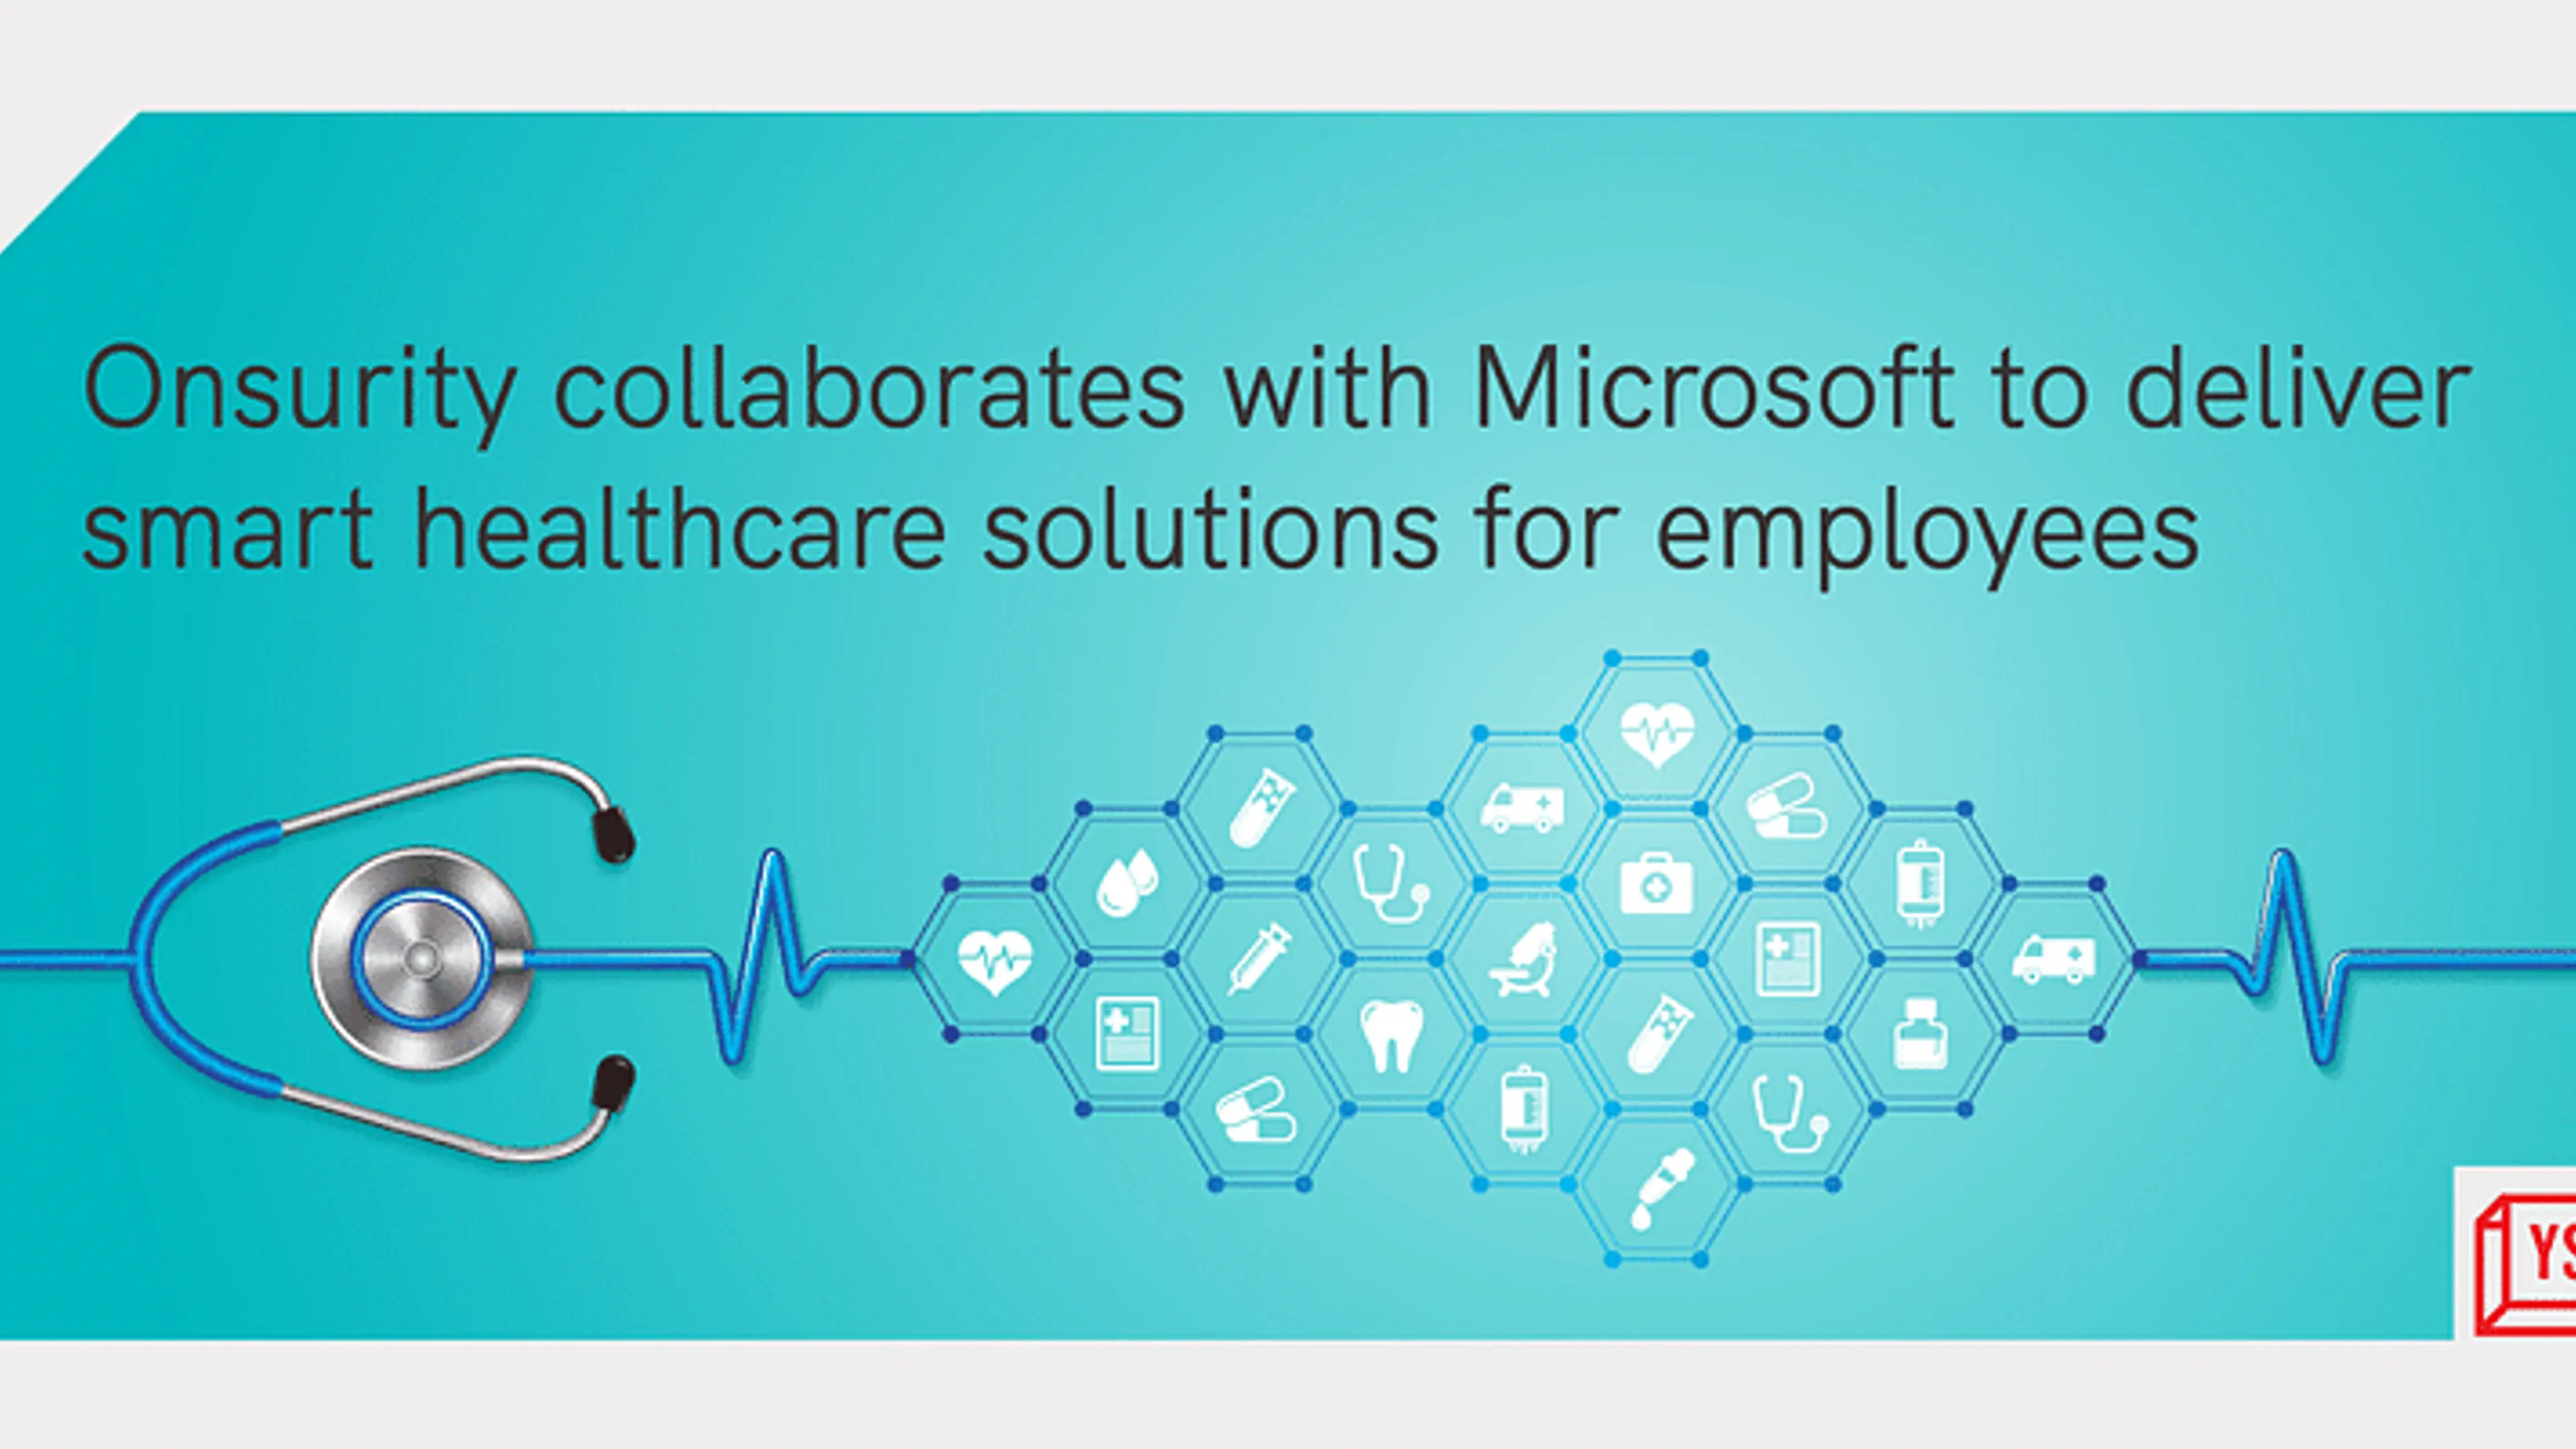 This healthtech startup is collaborating with Microsoft to deliver employee healthcare solutions to SMEs